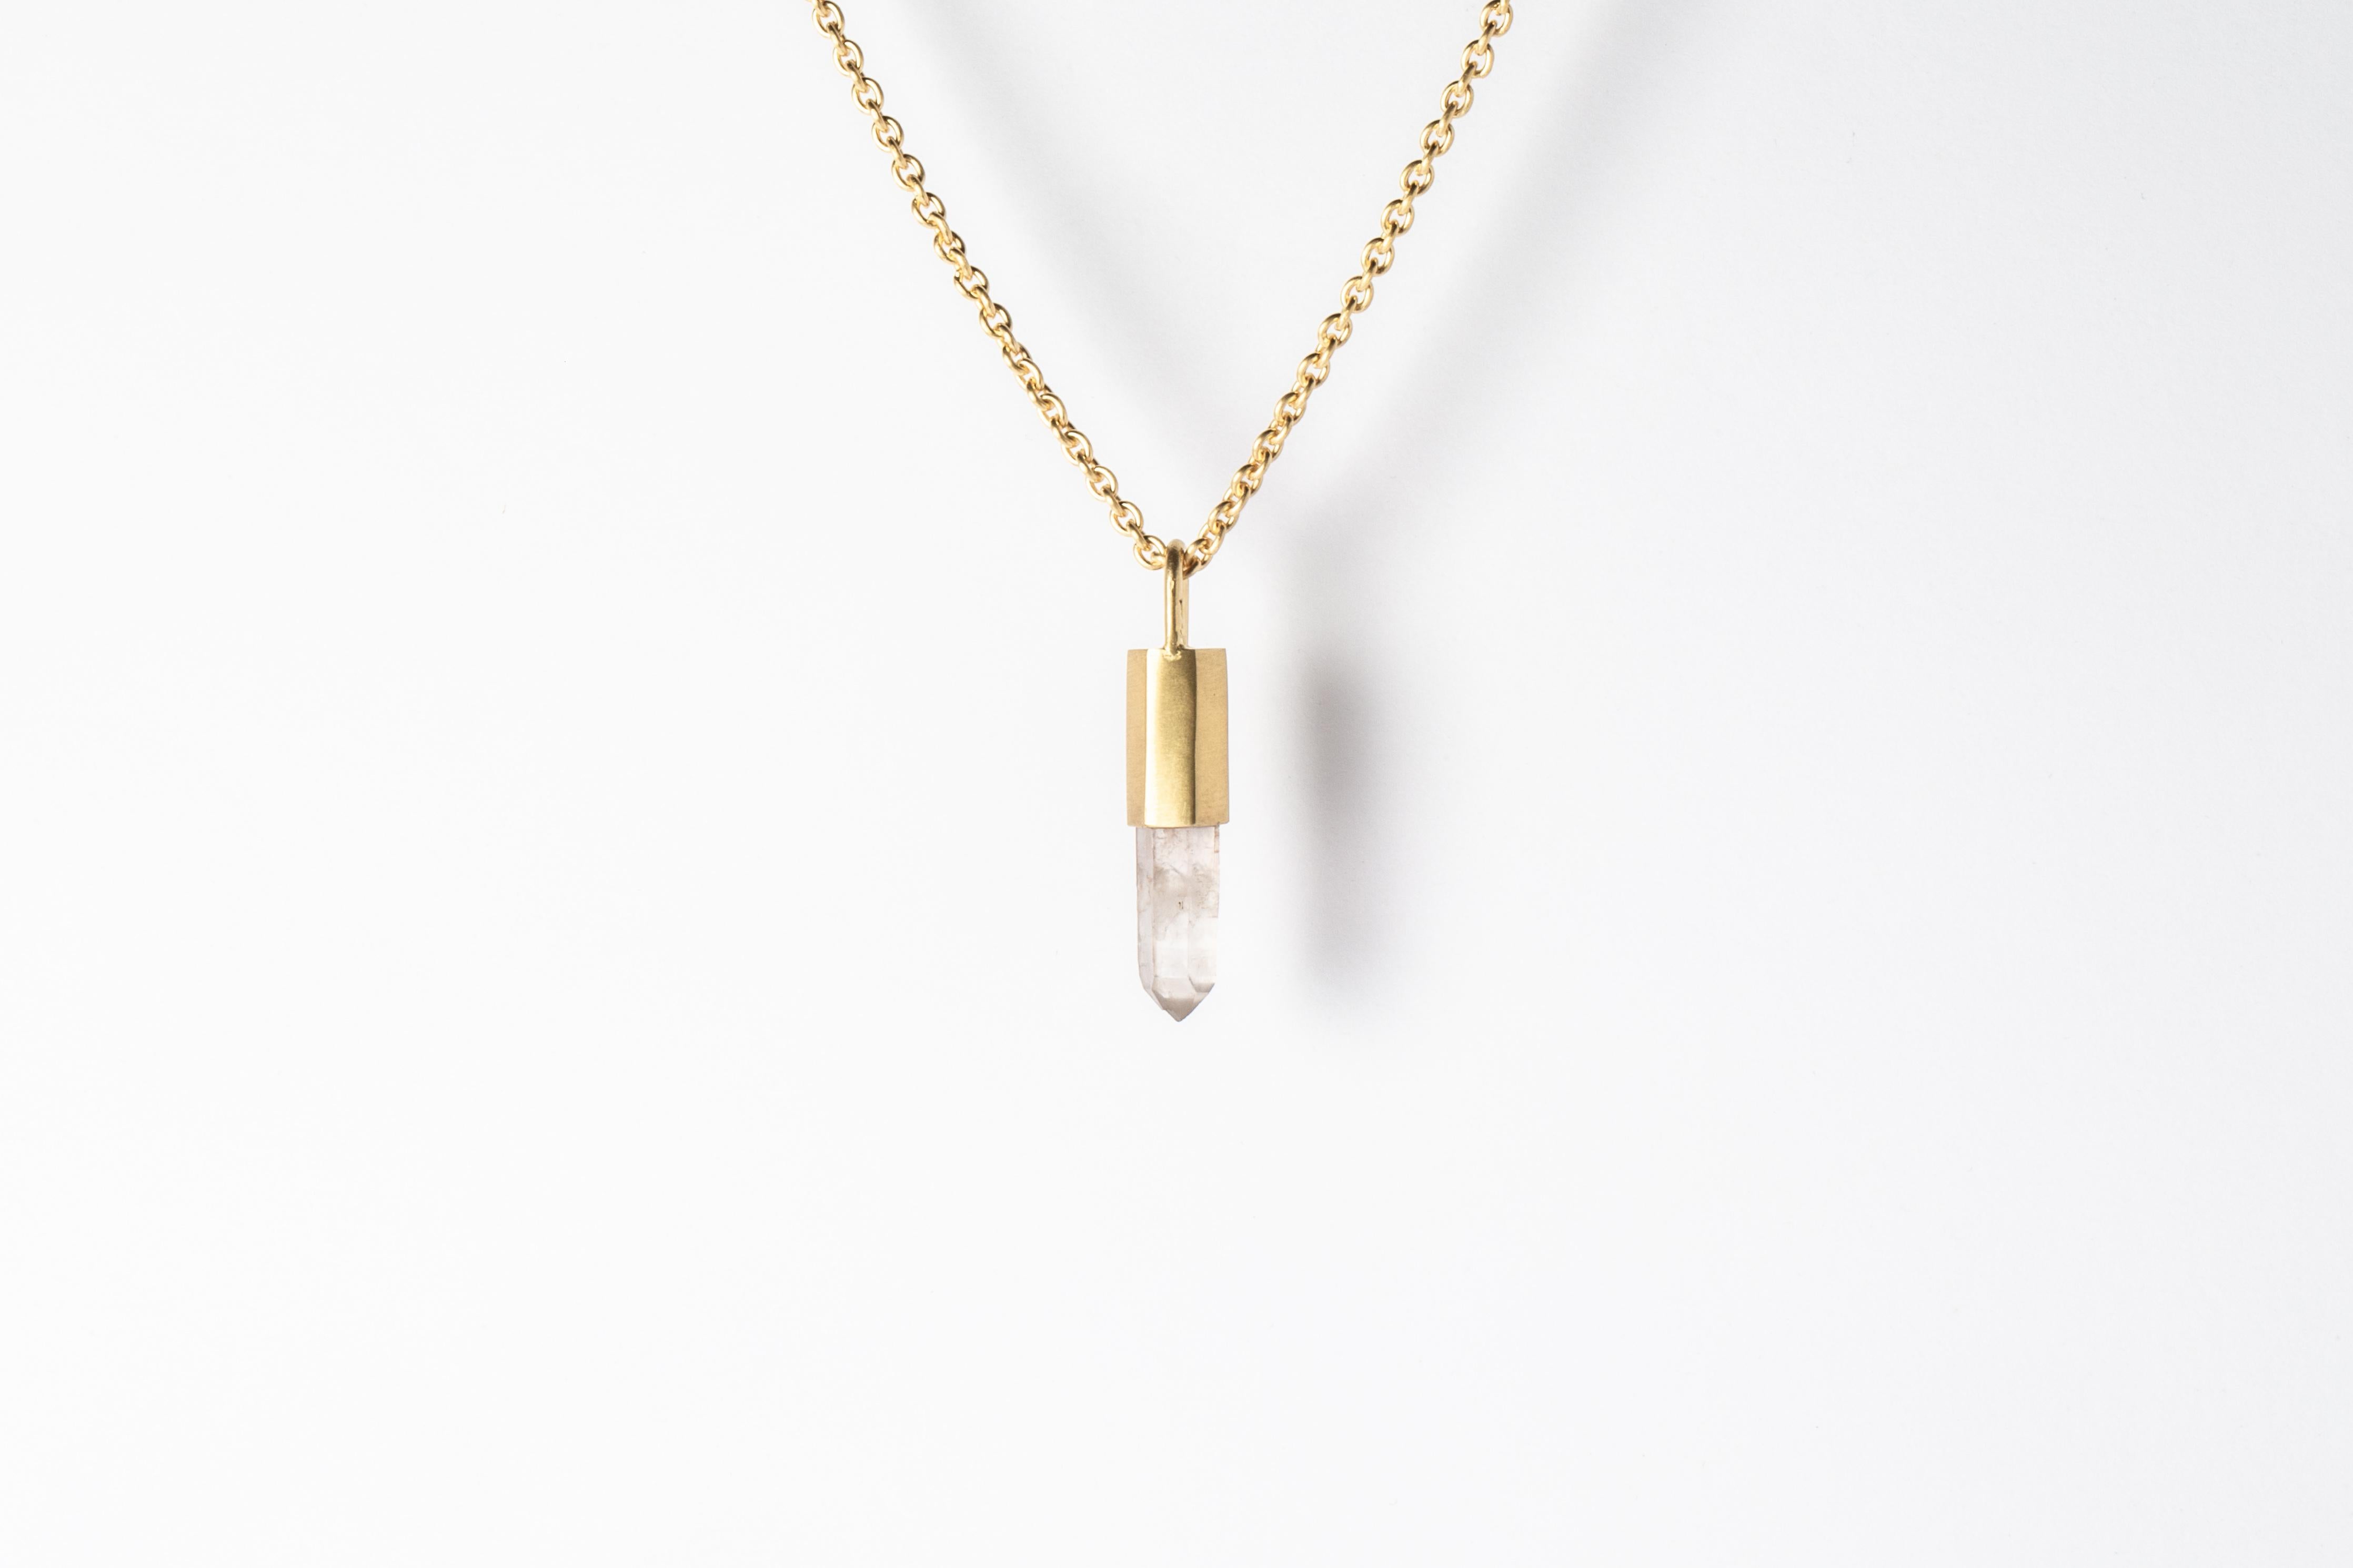 Necklace in brass, sterling silver, and a rough of misc quartz. Brass and sterling silver are  electroplated with 18k gold and lightly dipped in acid. It comes on 74 cm sterling silver chain.
The Talisman series is an exploration into the power of